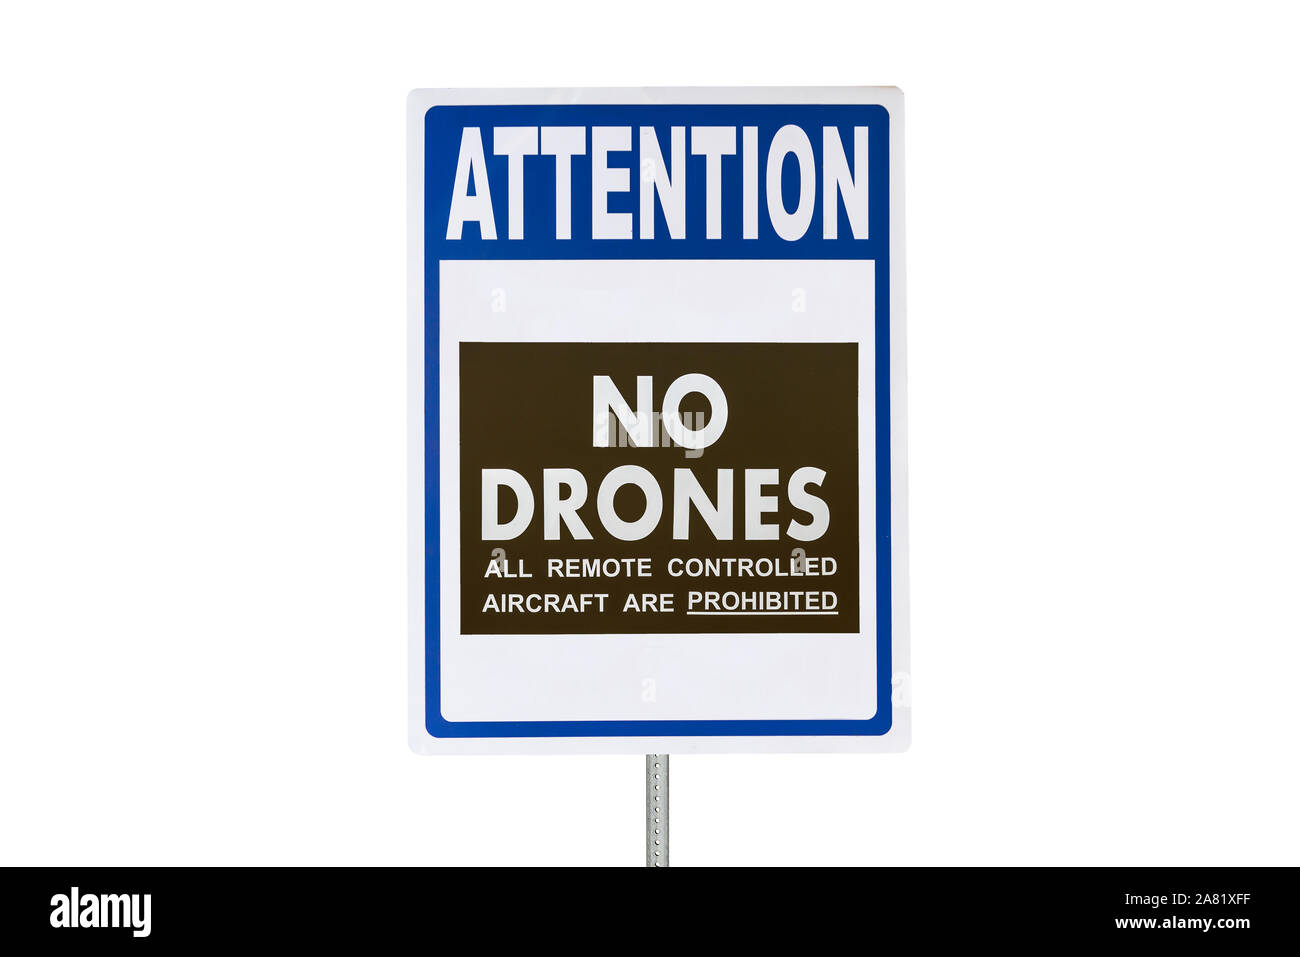 Attention no drones all remote controlled aircraft are prohibited sign isolated on white. Stock Photo